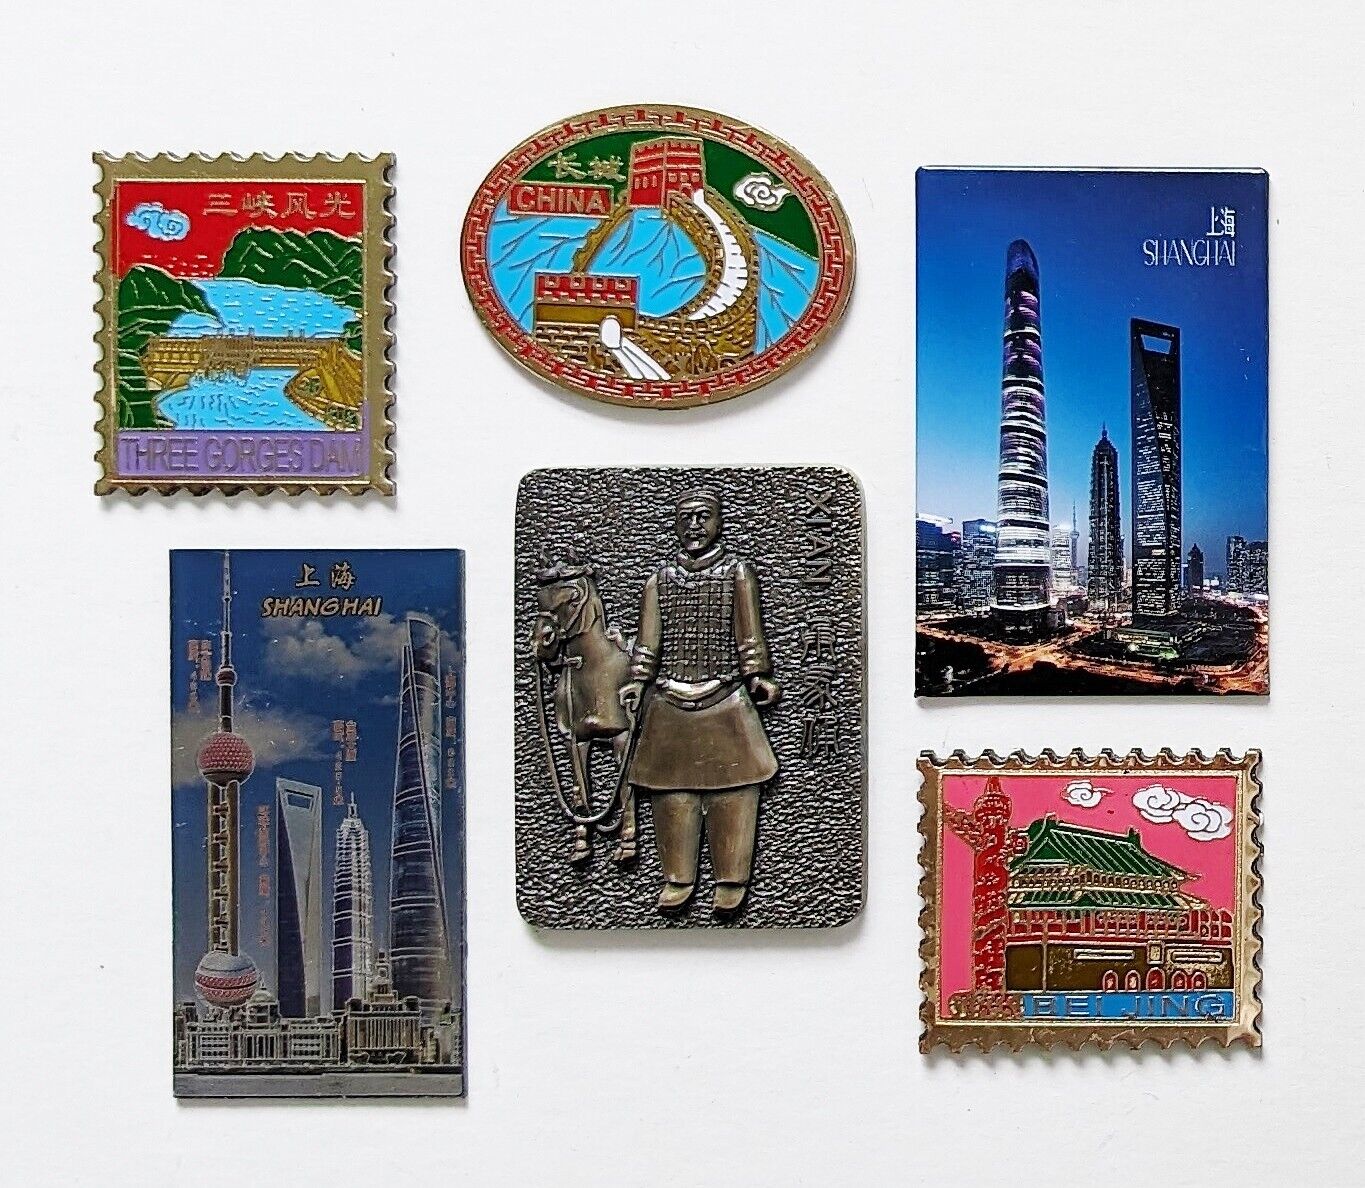 Lot of 6 Mostly Metal Souvenir Fridge Magnets from China Beijing Shanghai